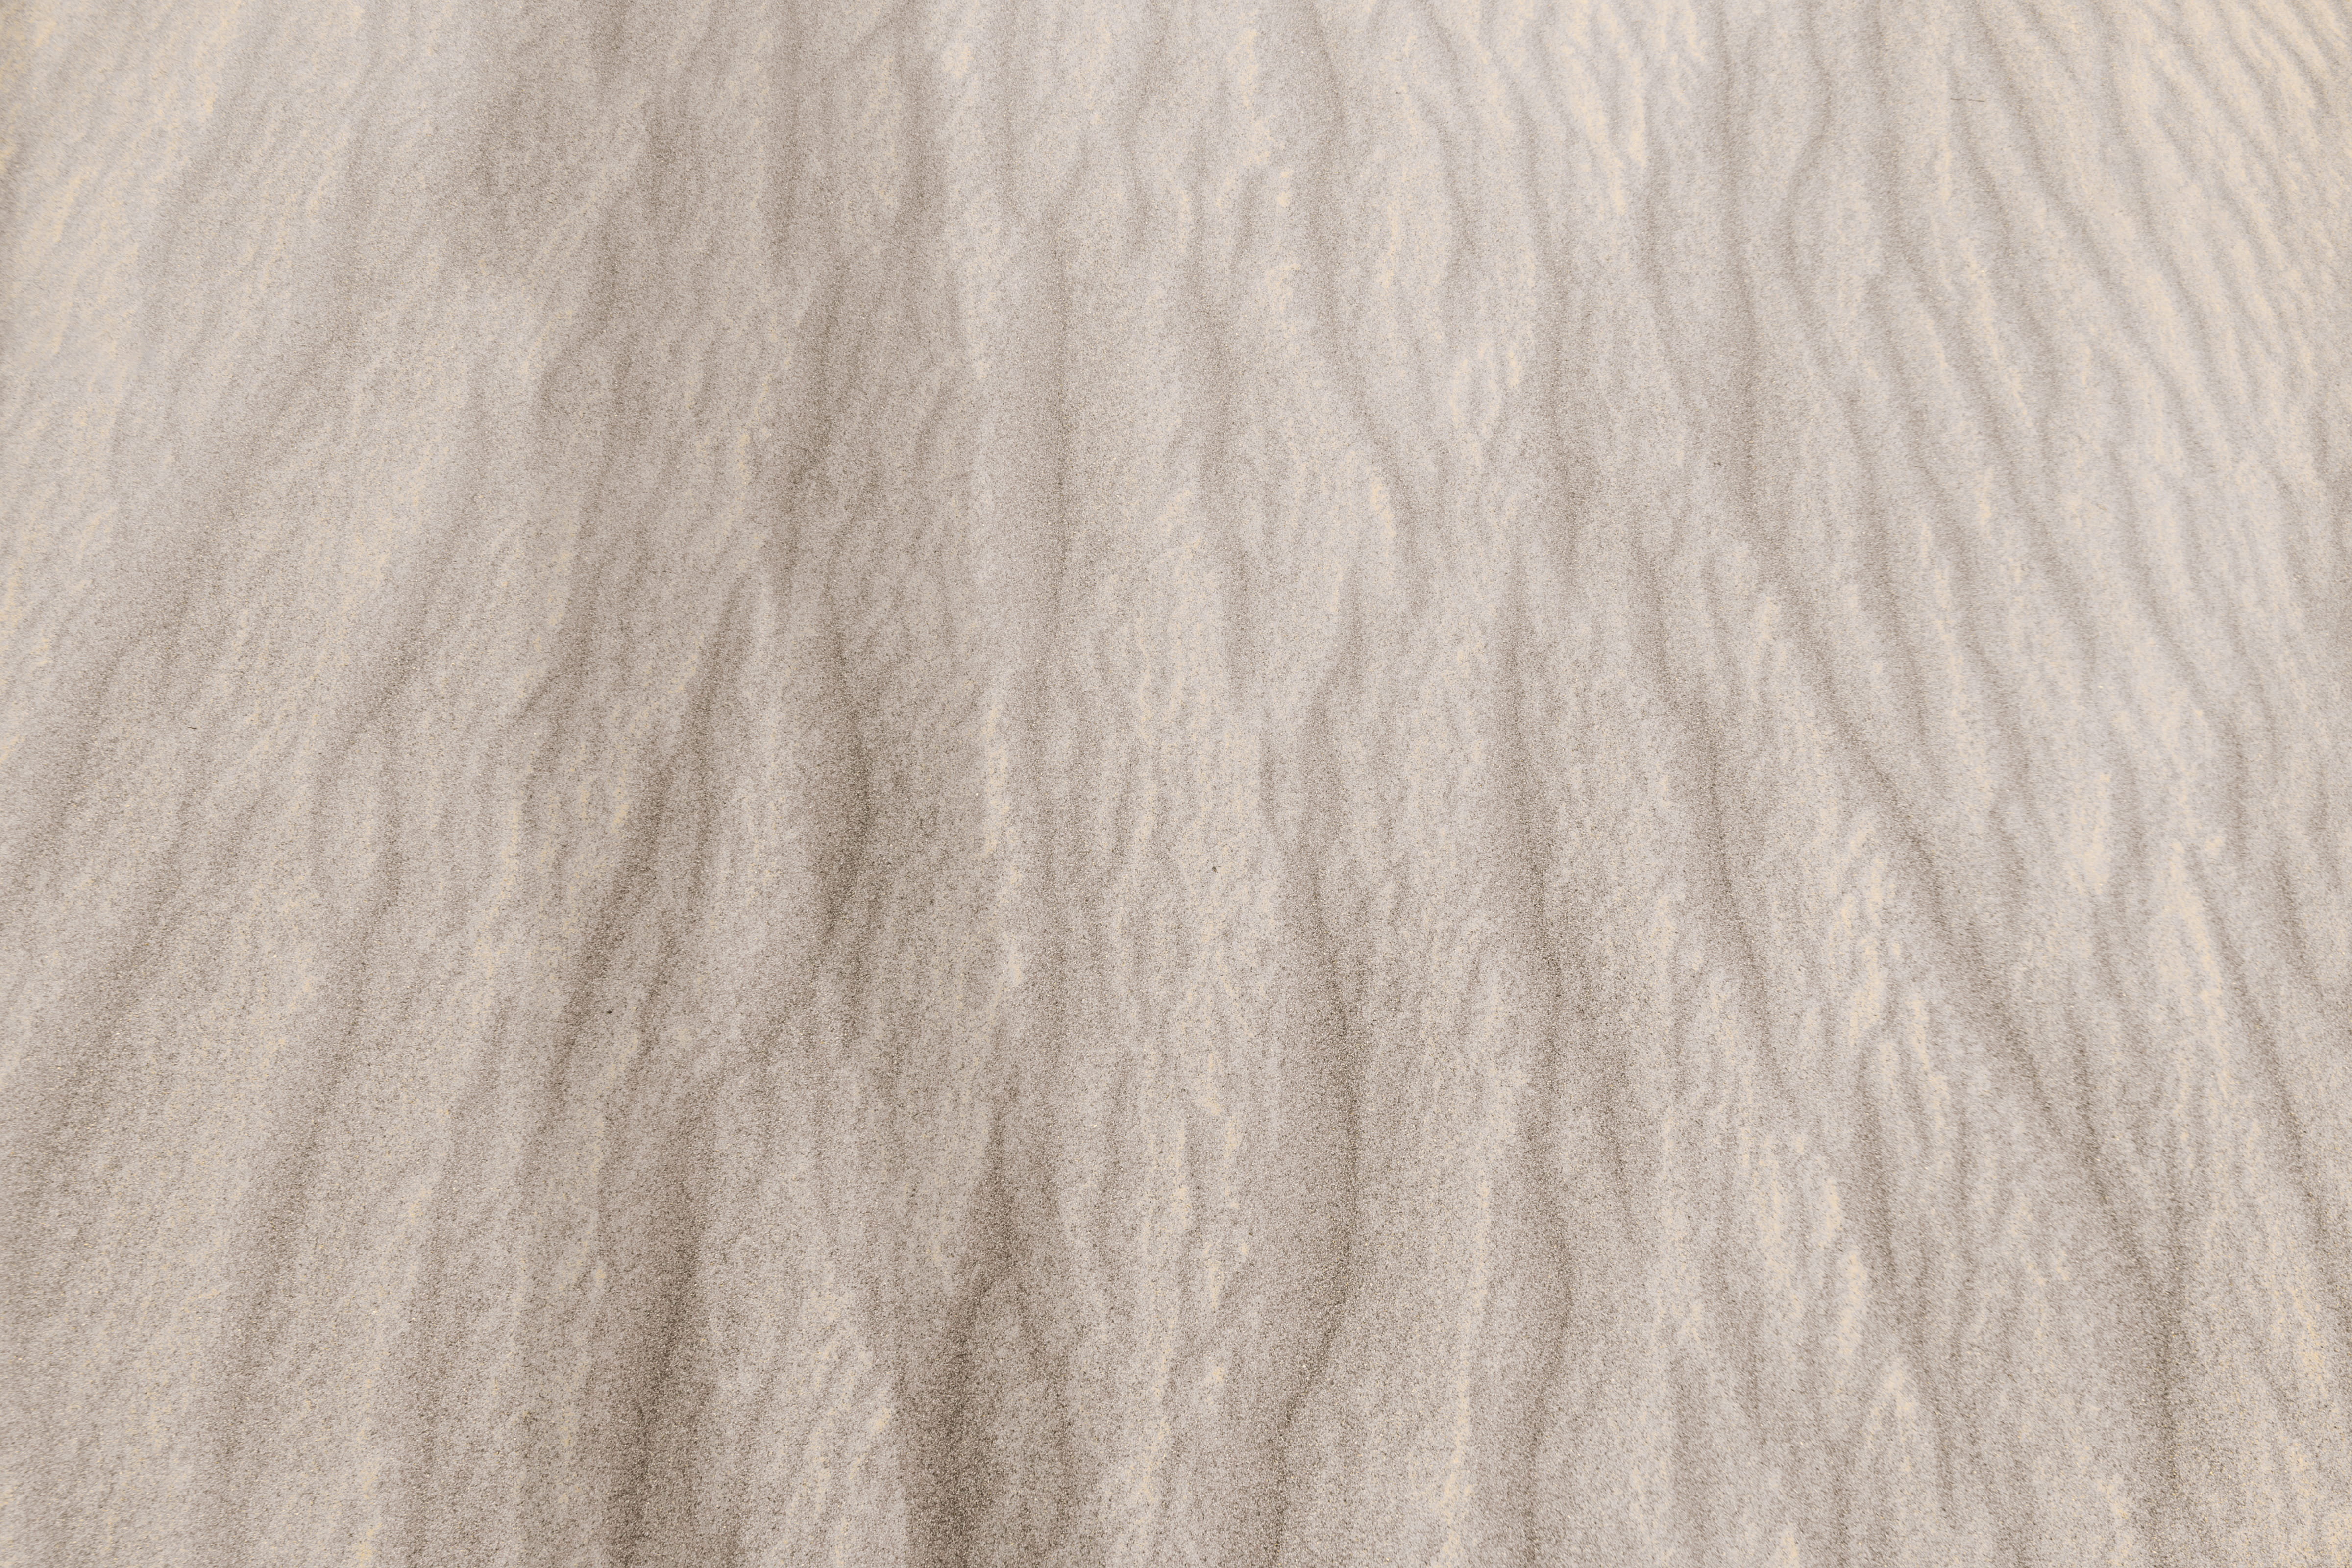 Sand texture. Sandy beach for background. Top view, backgrounds